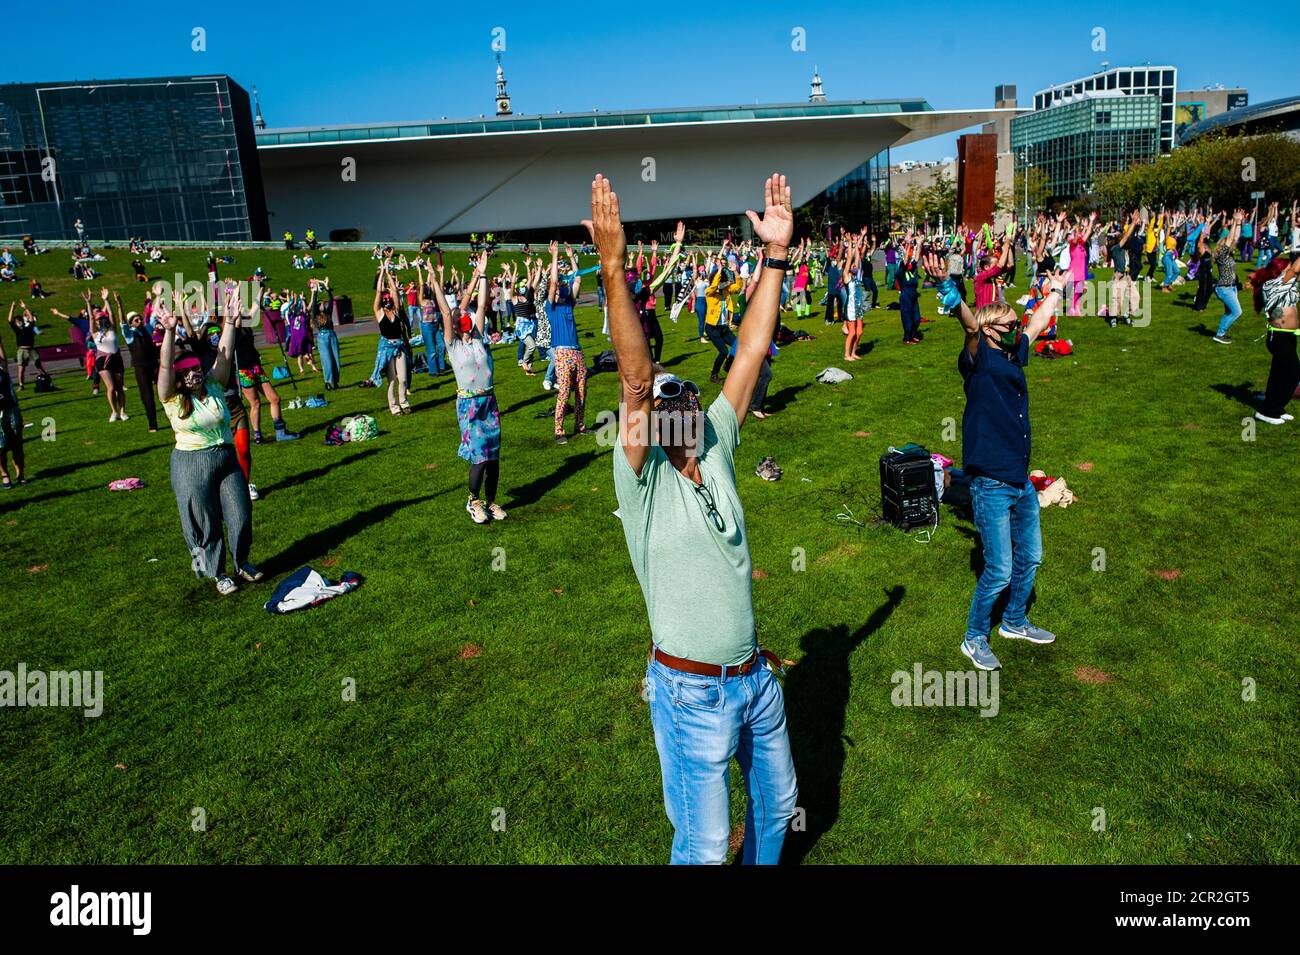 Hundreds of activists are seen dancing while raising their hands during the rally.During the whole month, the climate activists group Extinction Rebellion in The Netherlands has planned a new campaign called 'September Rebellion' to draw attention to the climate and ecological crisis. At the Museumplein, in Amsterdam, hundreds of XR activists danced to demand action against climate change in what protesters dubbed “civil disco-bedience”. Activists waved flags and danced to songs including the Bee Gees’ 1977 hit, Stayin’ Alive. After the Museumplein the activists blocked for a few minutes one o Stock Photo